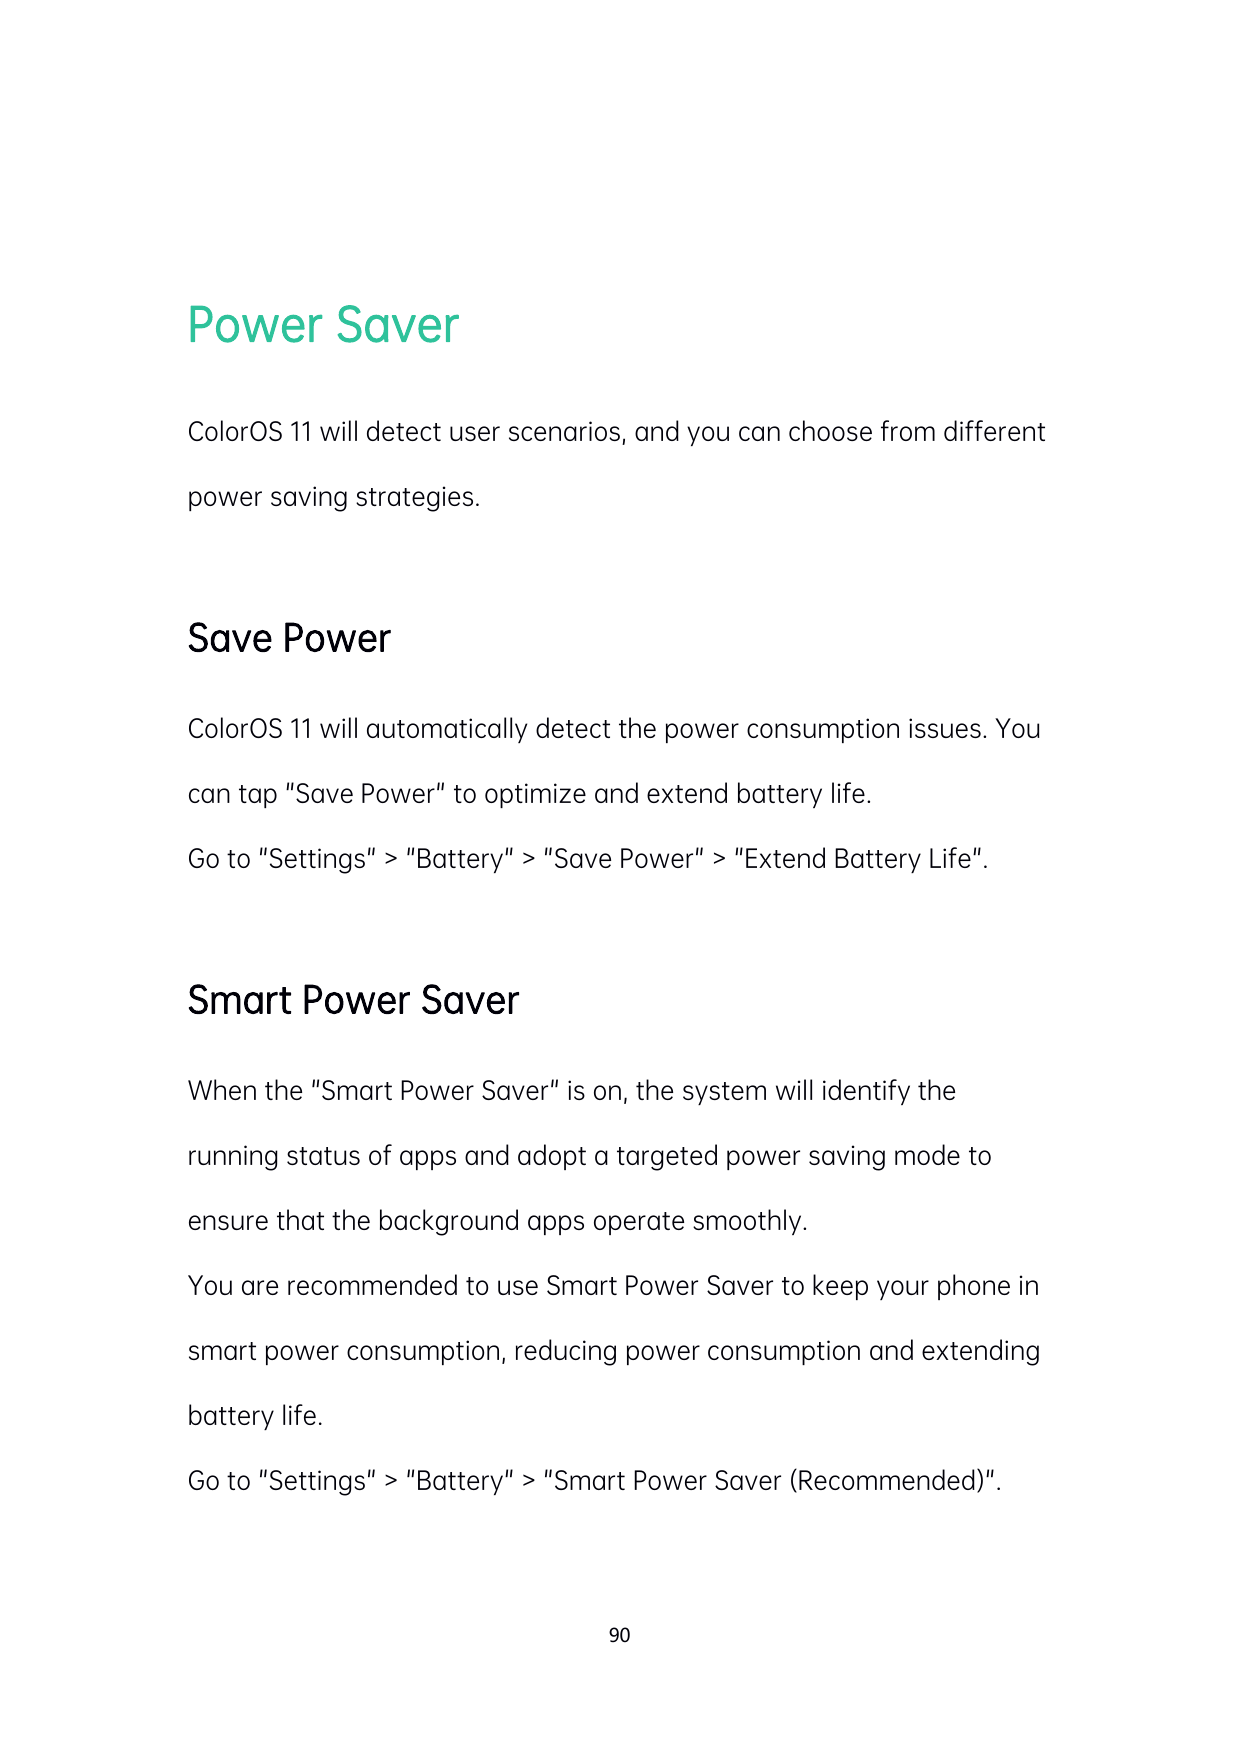 Power SaverColorOS 11 will detect user scenarios, and you can choose from differentpower saving strategies.Save PowerColorOS 11 